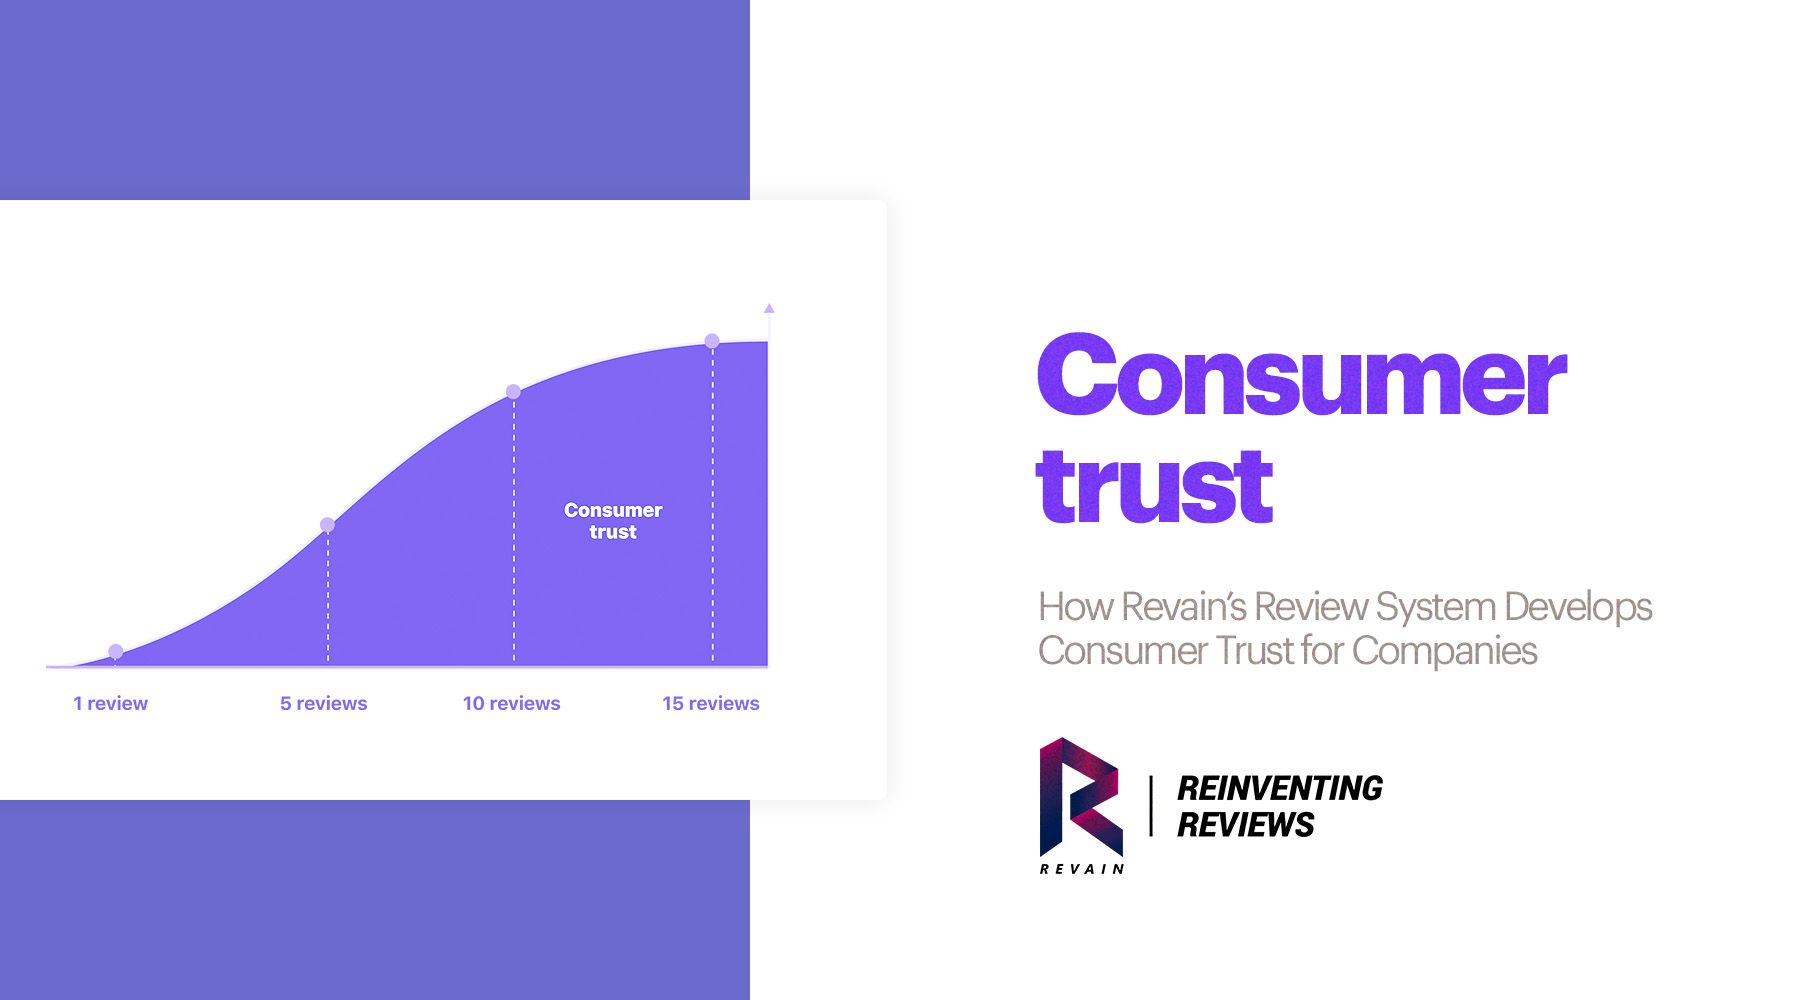 Article How Revain’s Review System Develops Consumer Trust for Companies